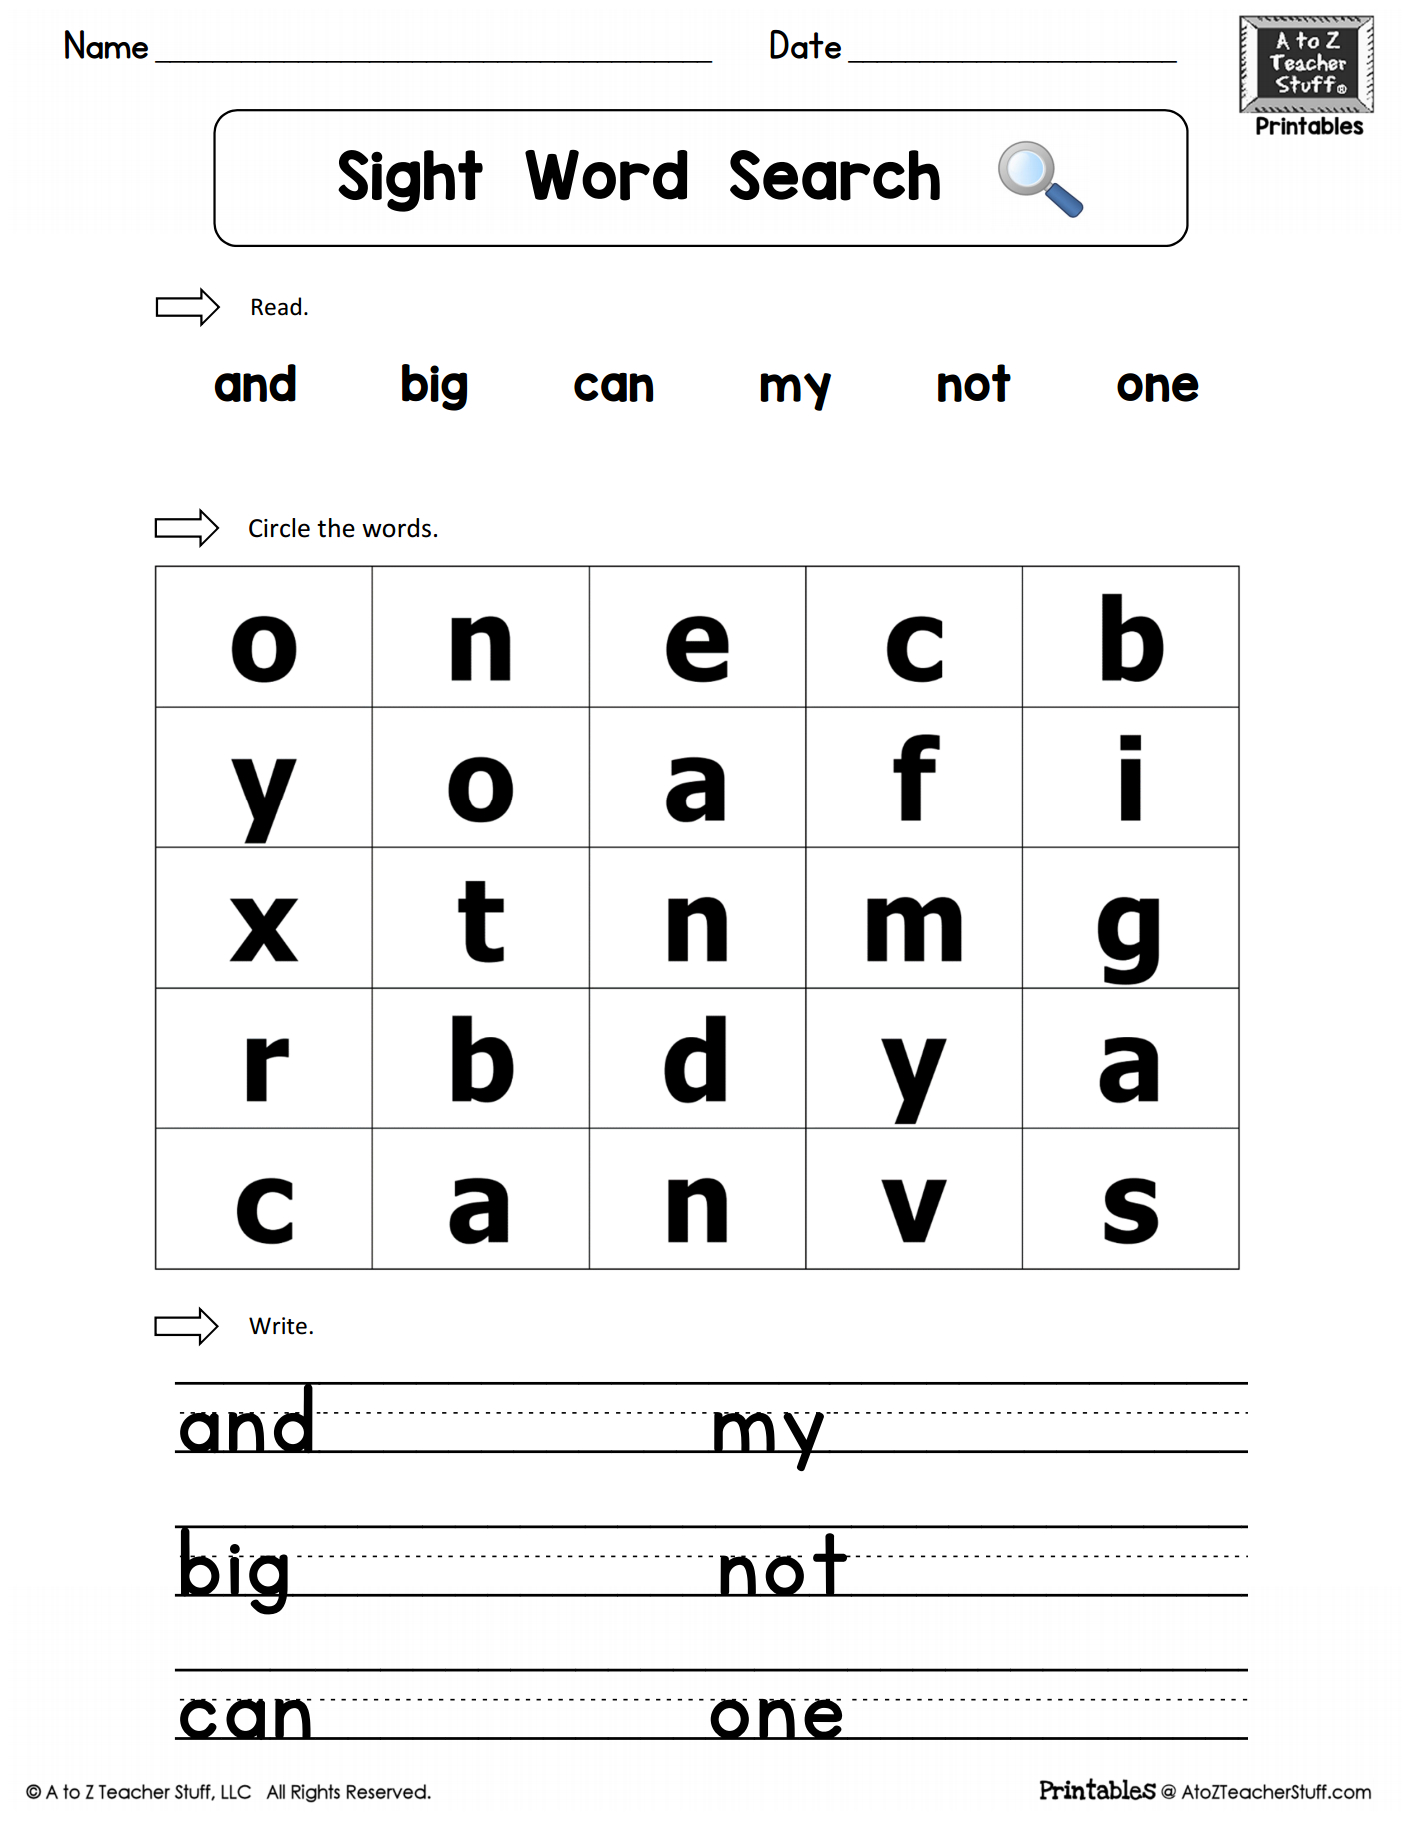 A To Z Teacher Stuff Printable Pages And Worksheets | | A To Z Teacher Stuff Tools Printable Handwriting Worksheet Generator